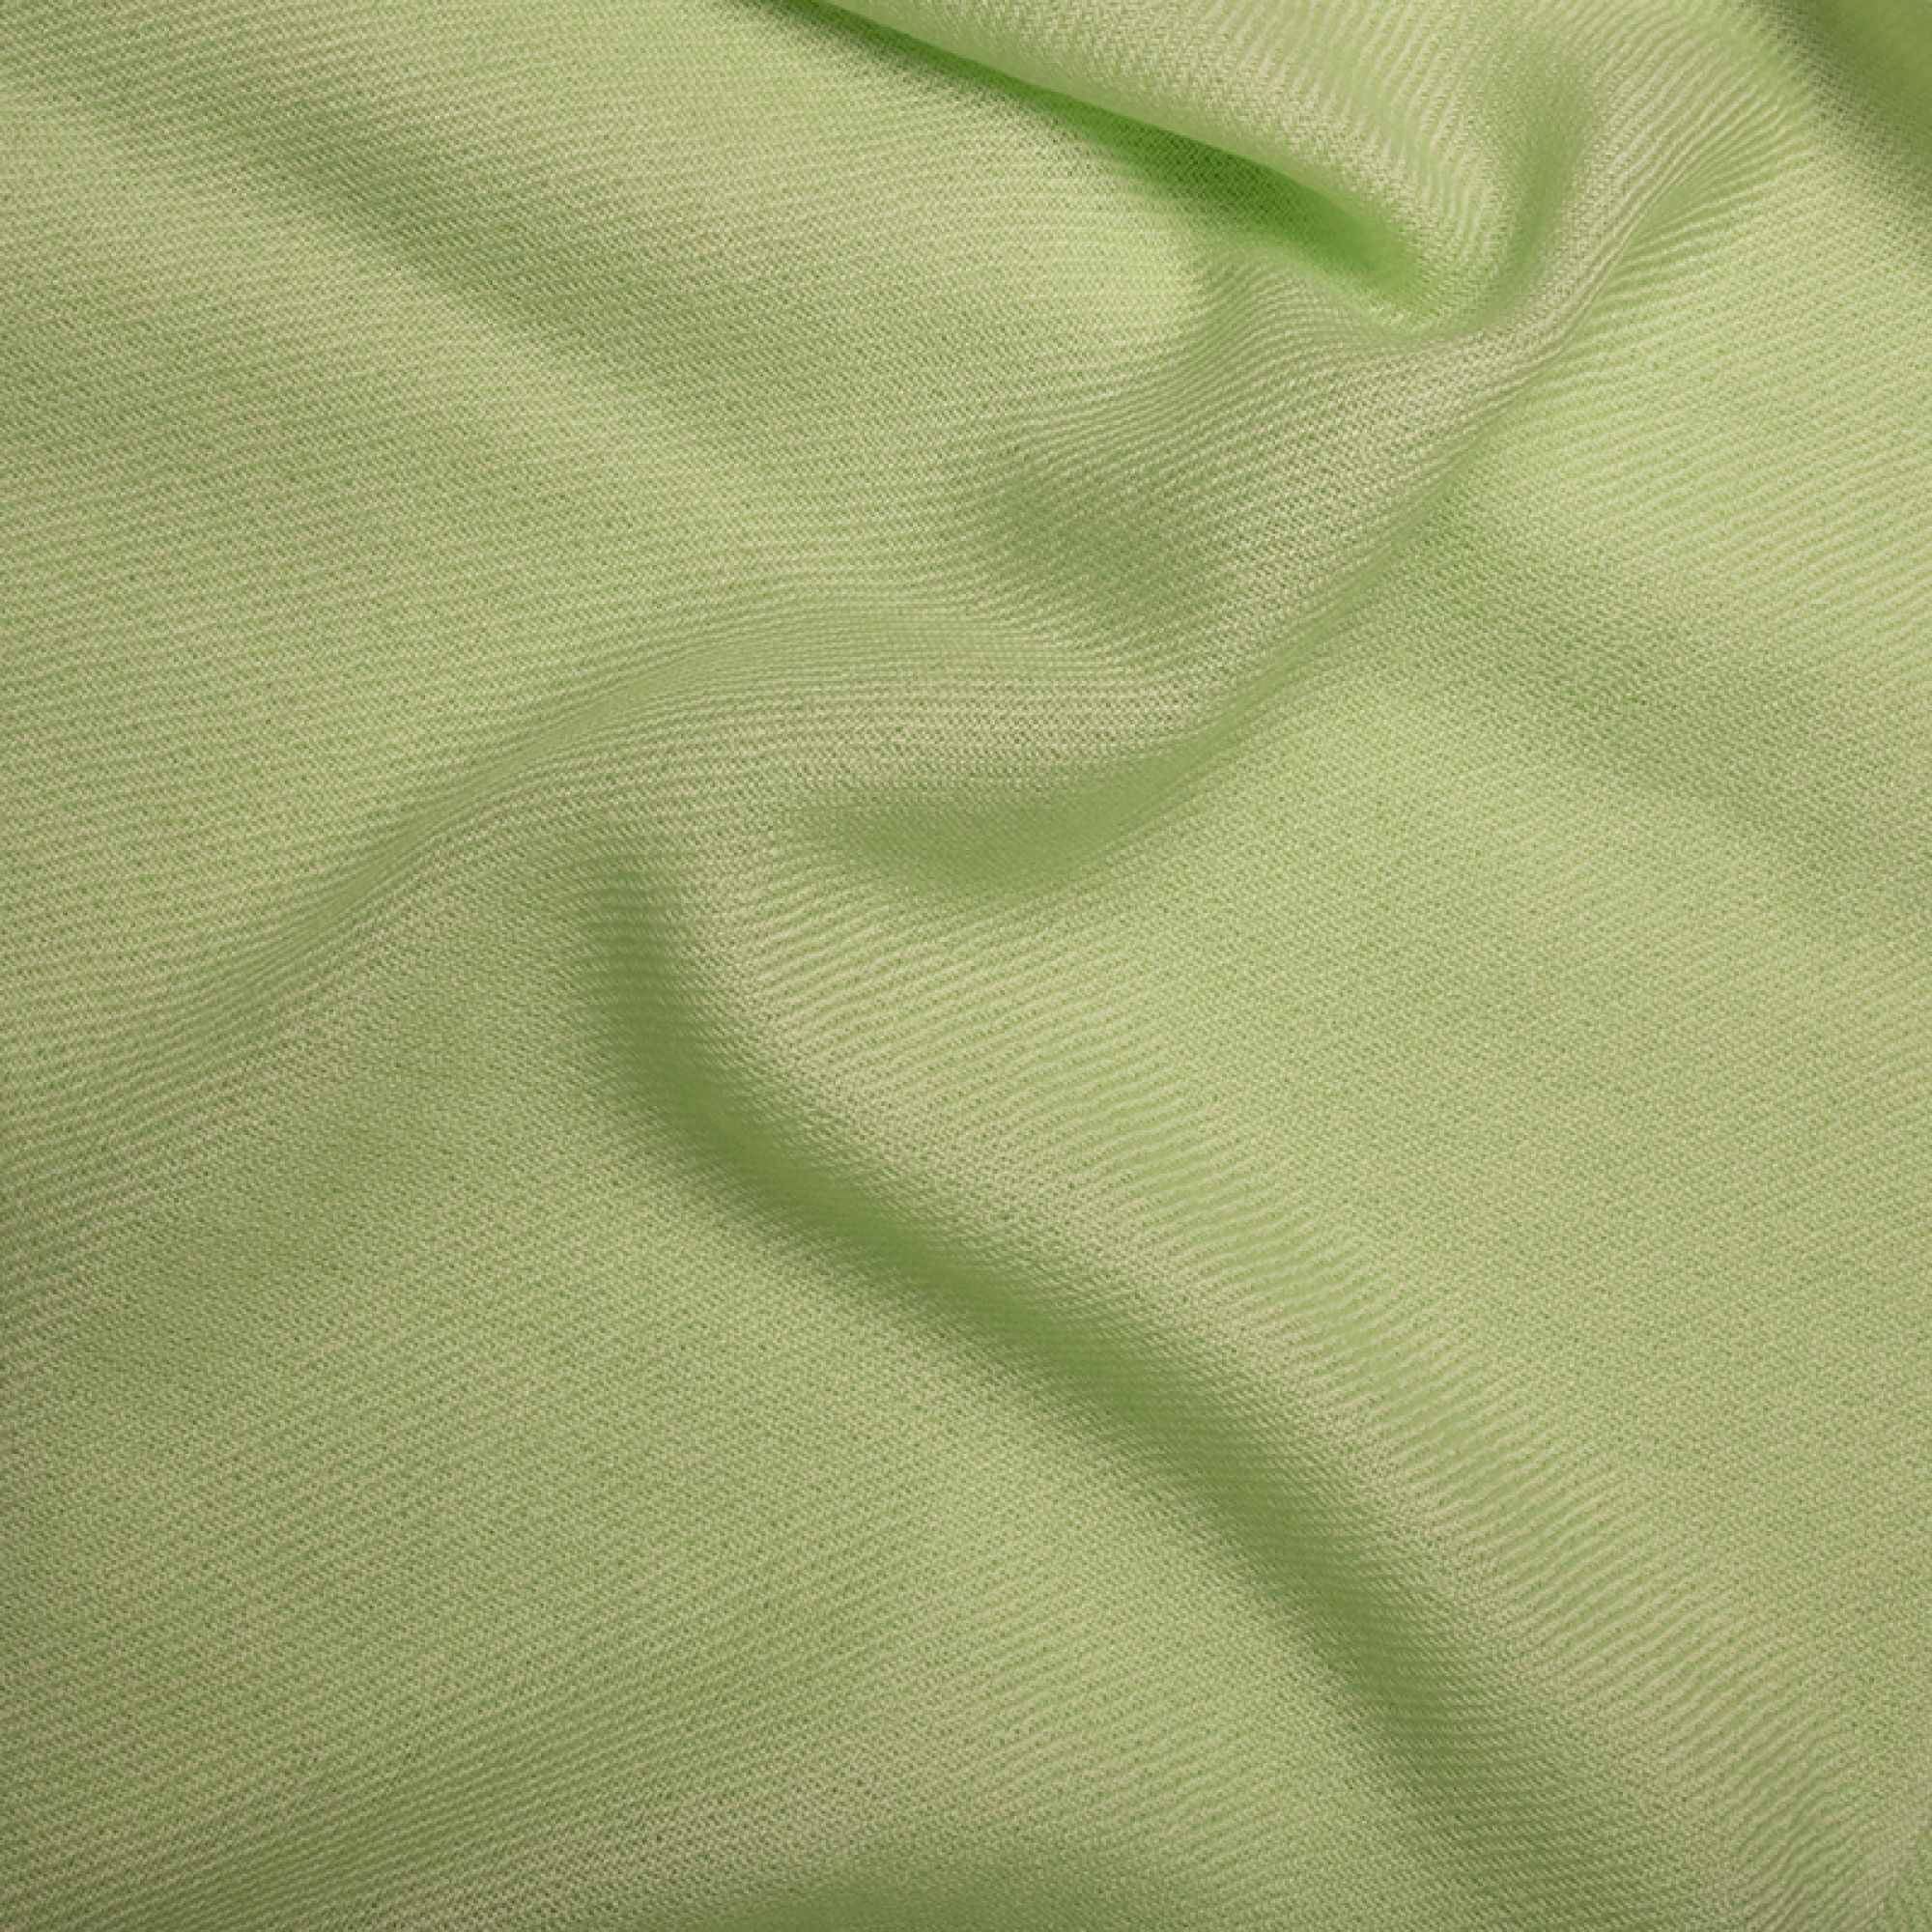 Cashmere accessories blanket toodoo plain s 140 x 200 lime green 140 x 200 cm